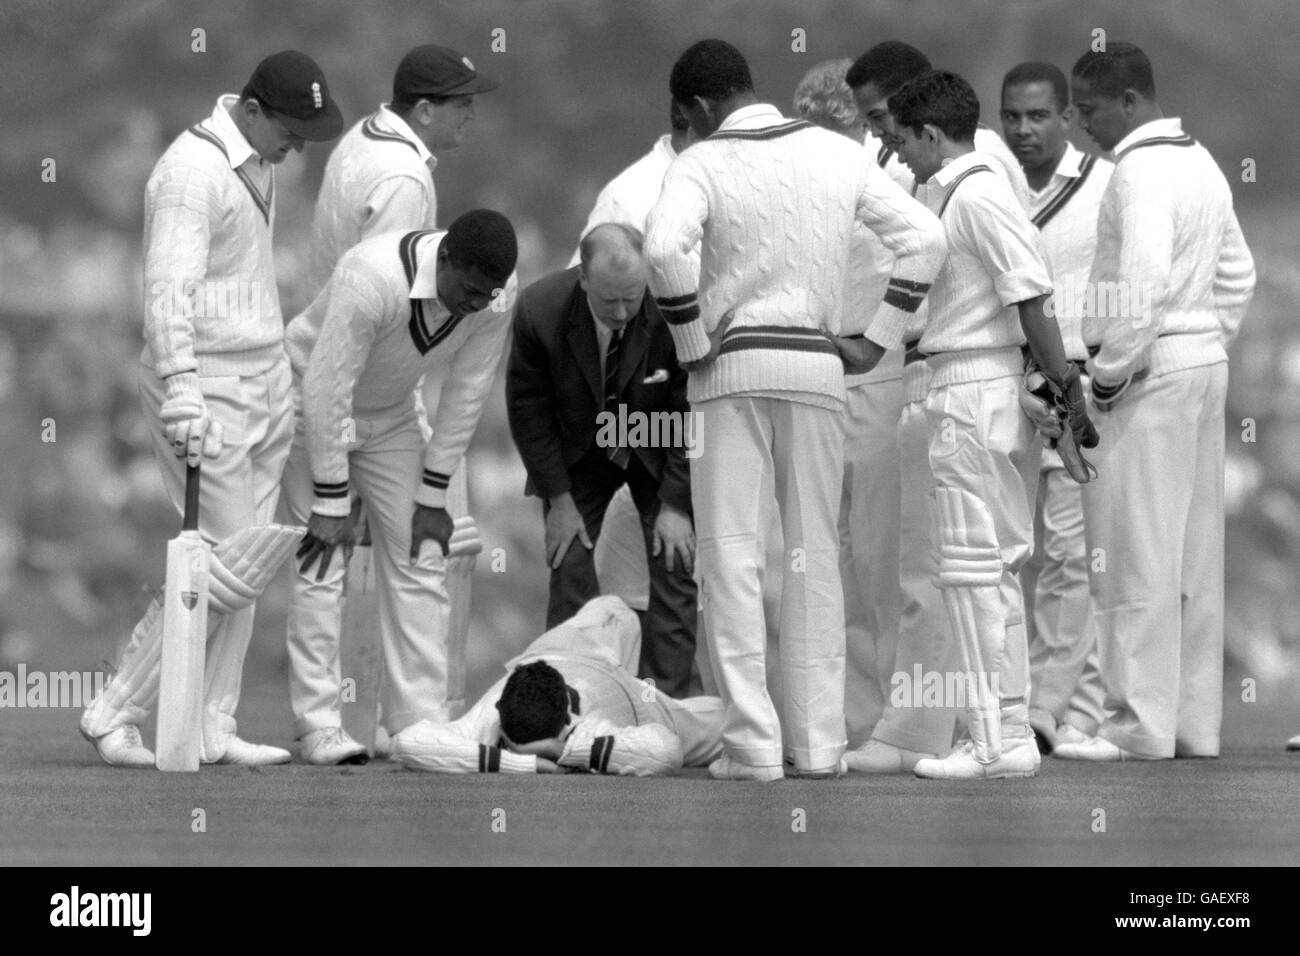 A crowd of anxious players surrounds Willie Rodriguez and Basil Butcher of the West Indies team who were knocked out when they collided as they went down for a catch from Ted Dexter in the match against the Duke of Norfolk's XI at Arundel Castle, Sussex. Stock Photo